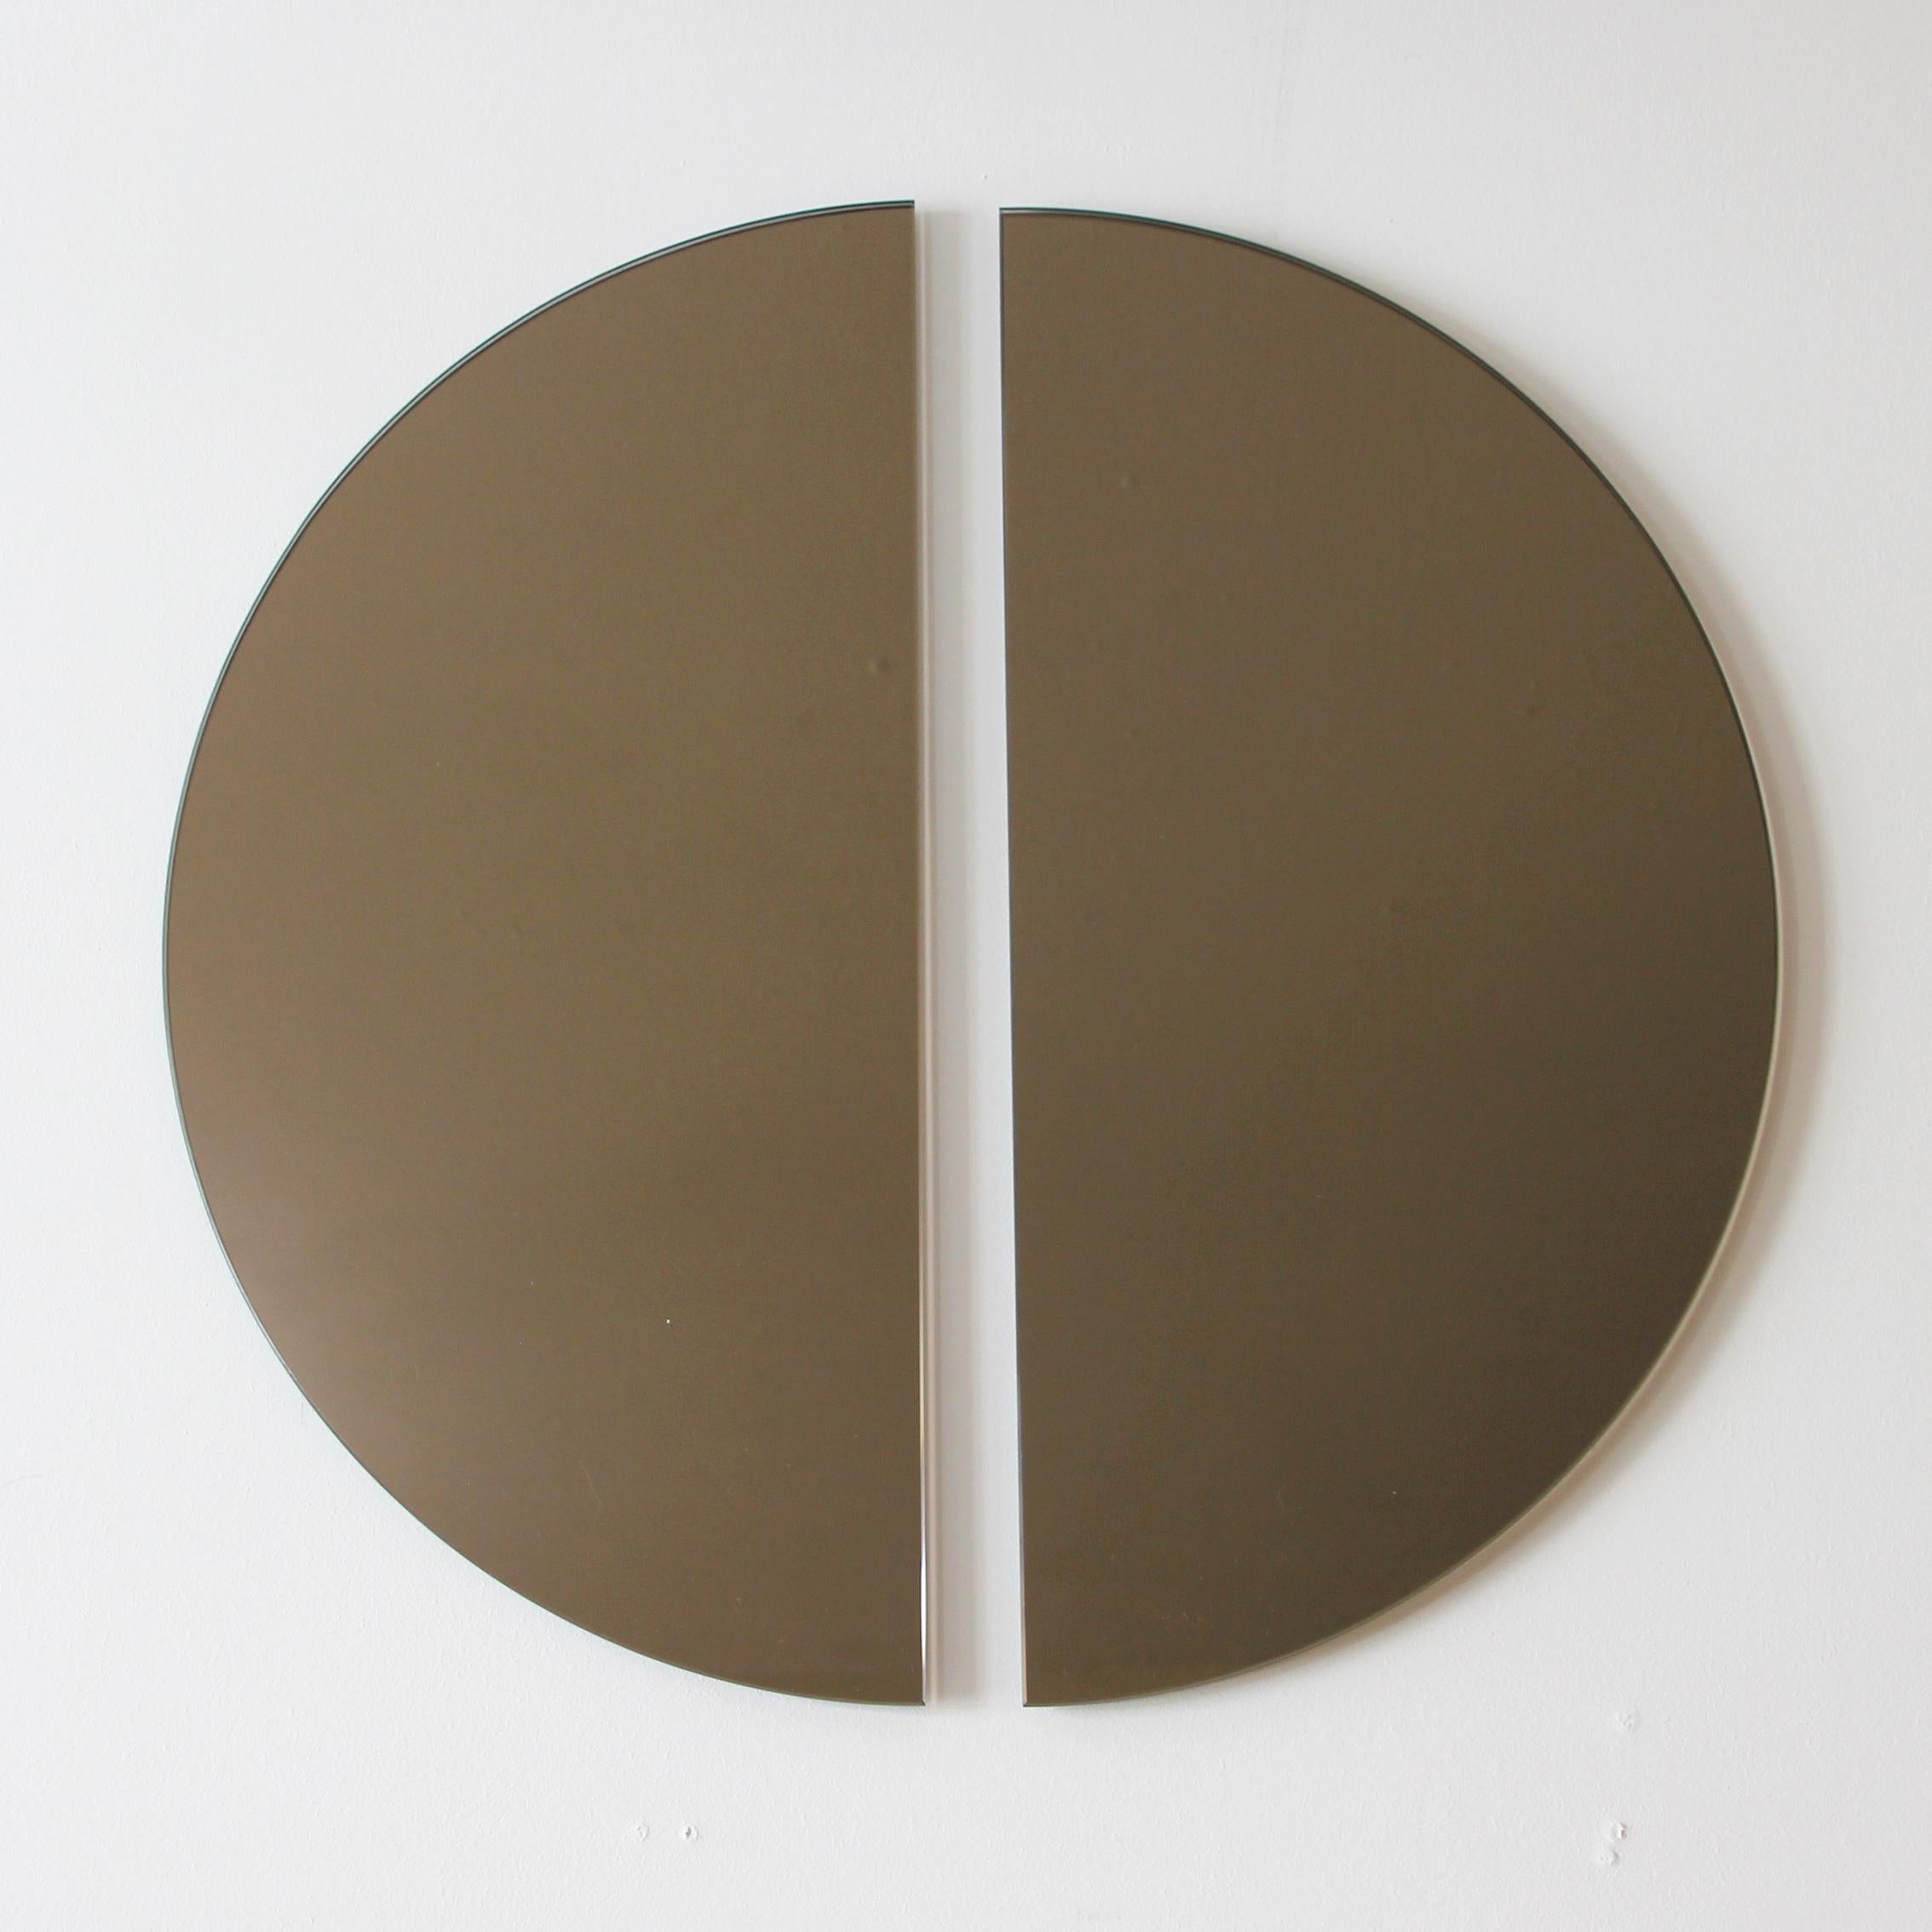 Original and minimalist half-moon bronze tinted frameless mirror with a floating effect. Quality design that ensures the mirror sits perfectly parallel to the wall. Designed and made in London, UK. 

Each piece is fitted with professional plates